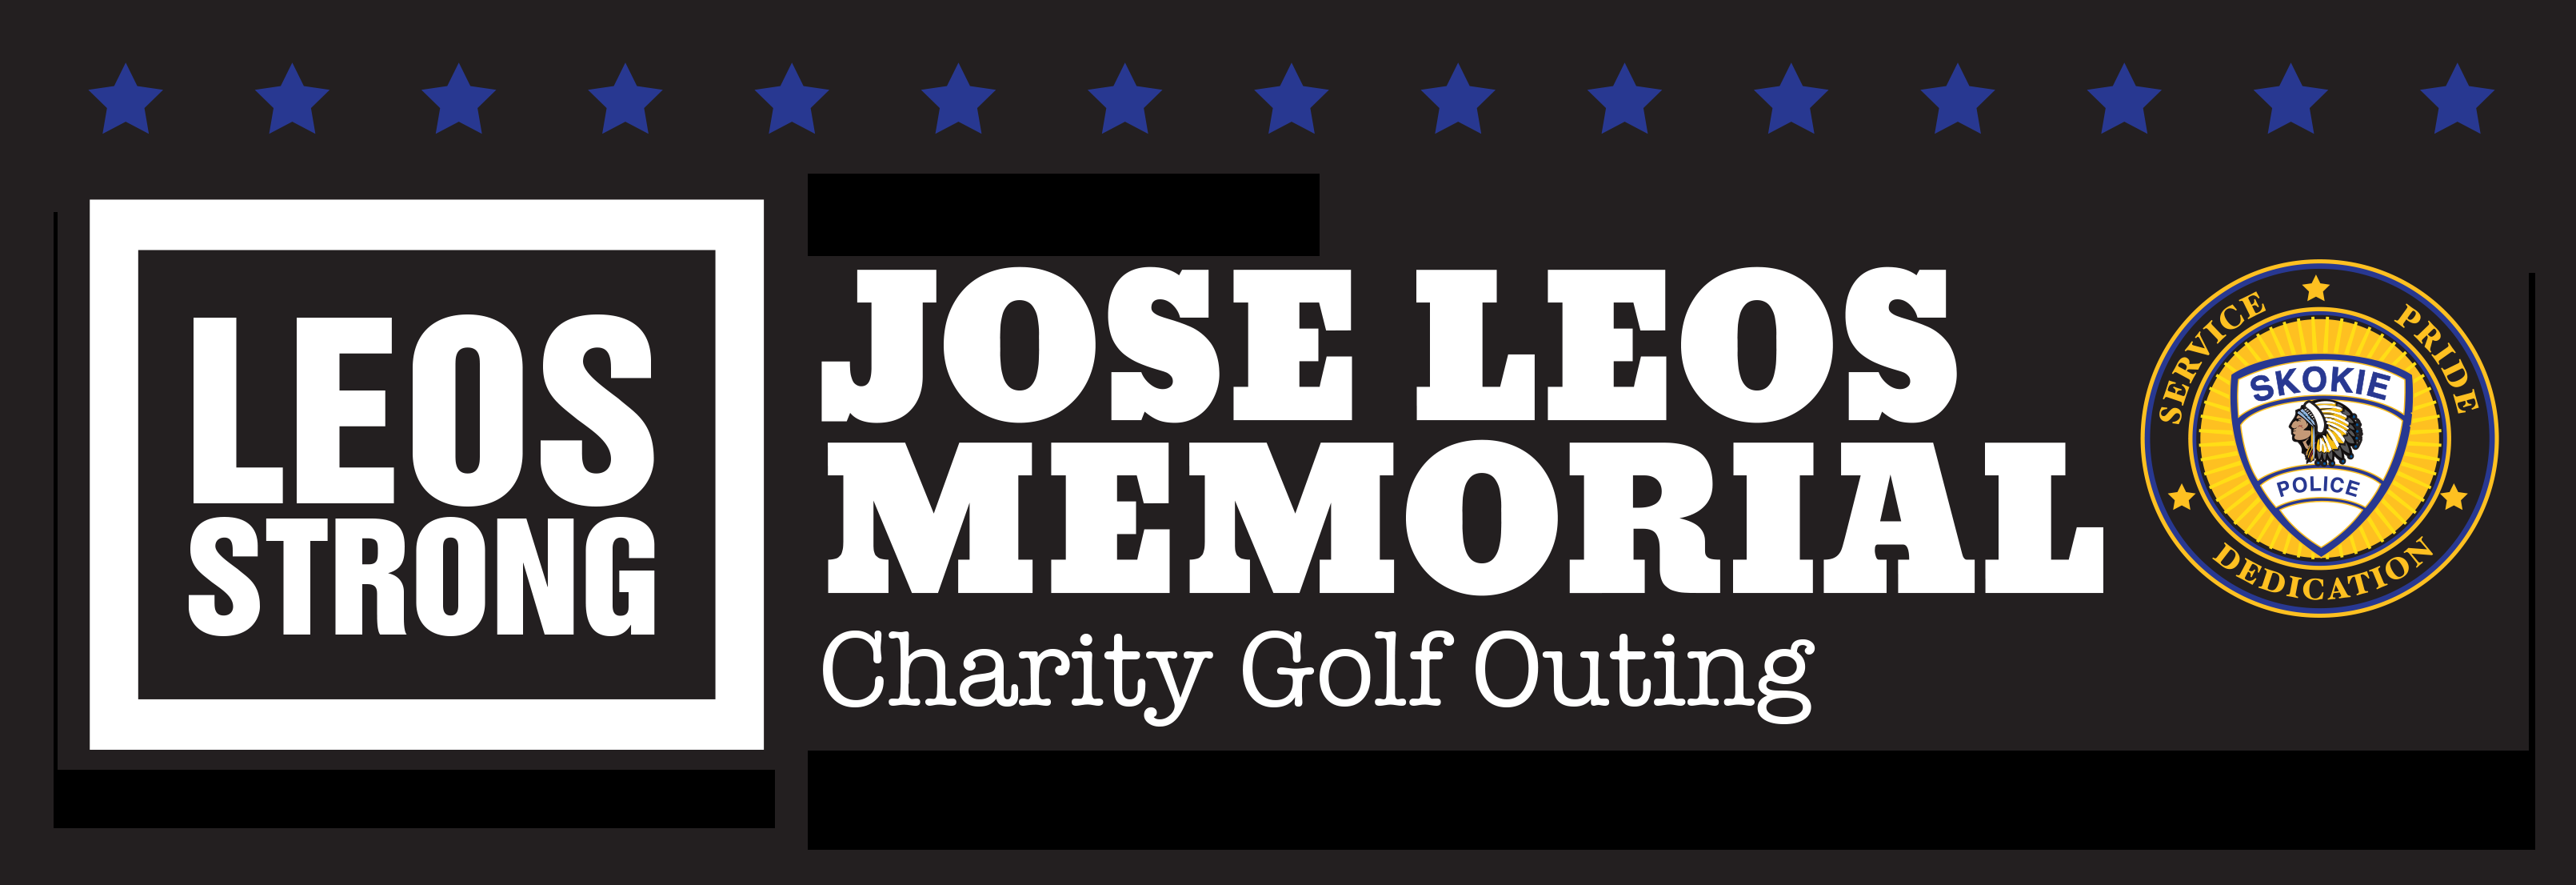 Jose Leos Memorial Charity Golf Outing